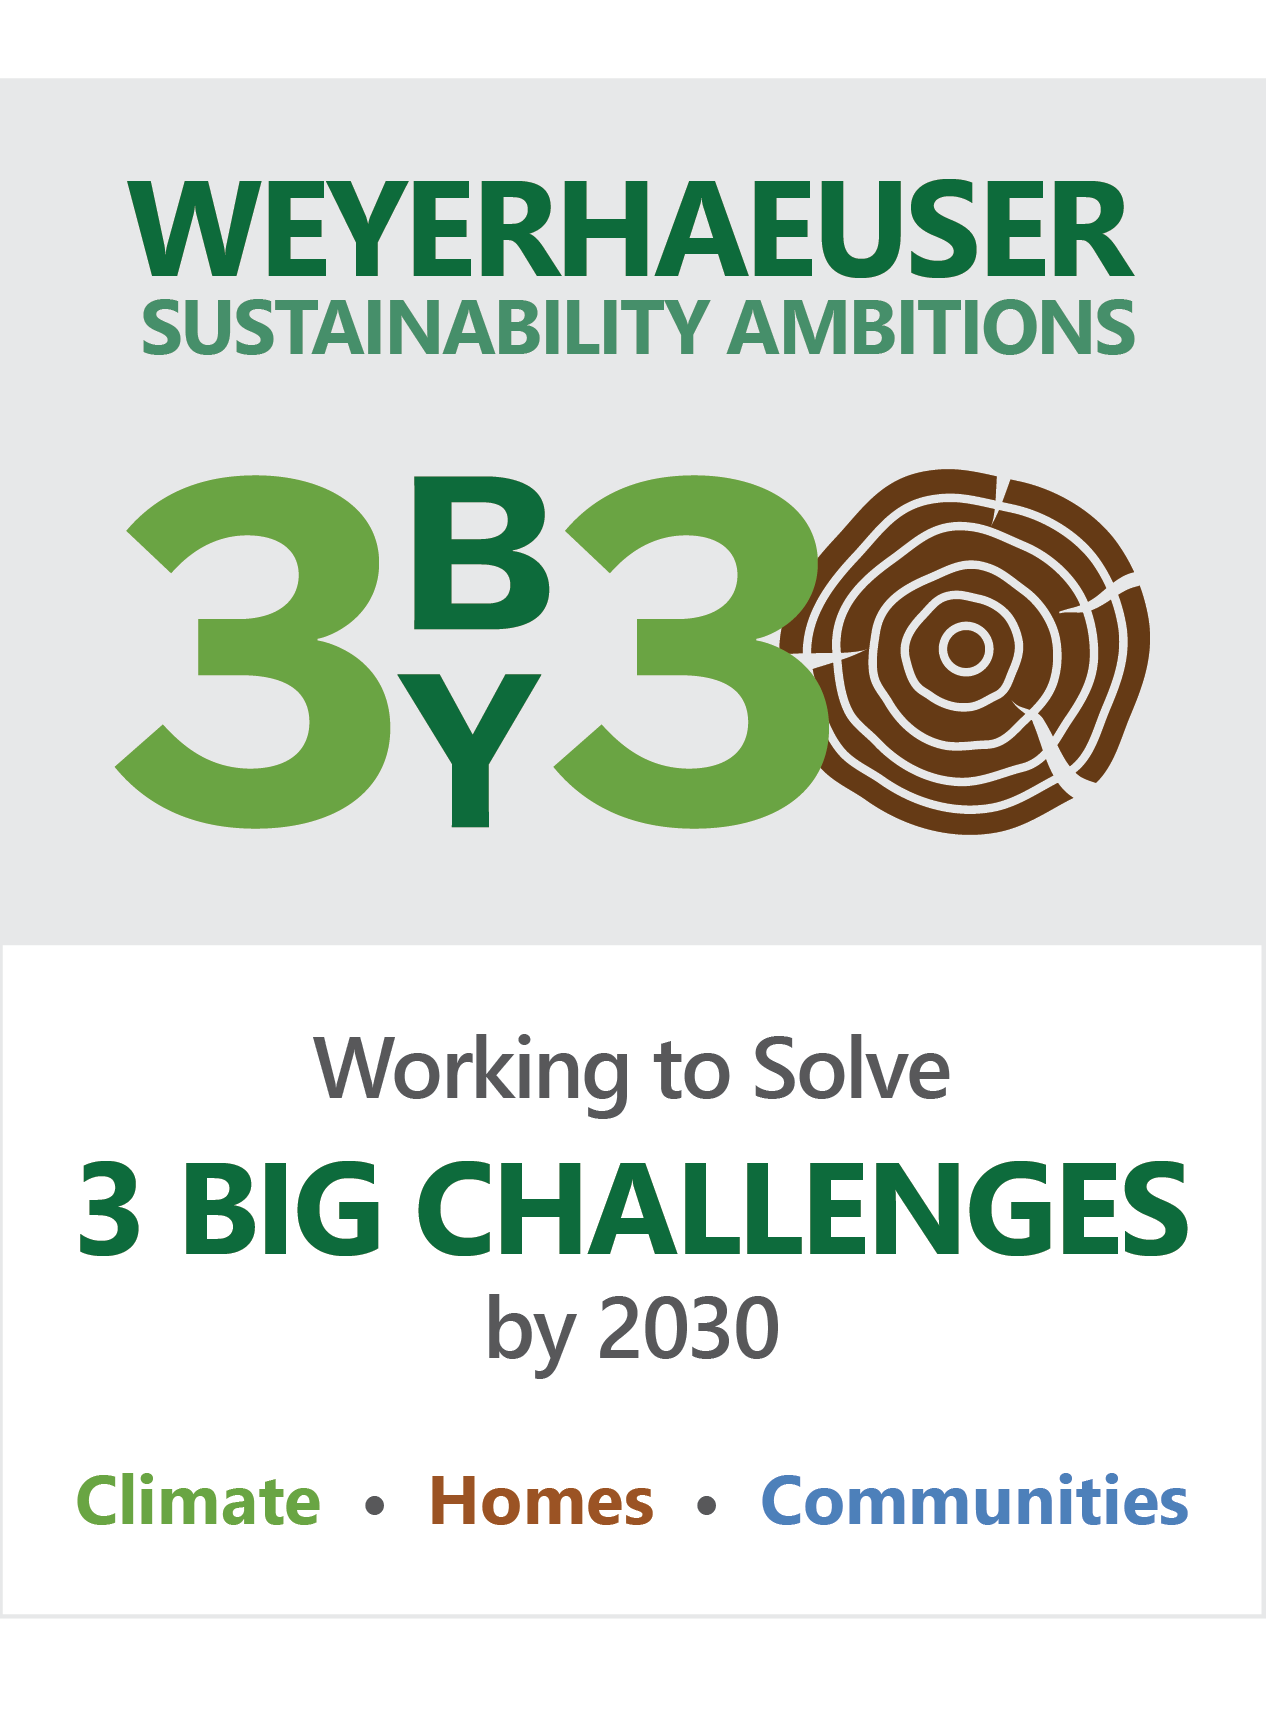 Working to solve 3 by challenges by 2030